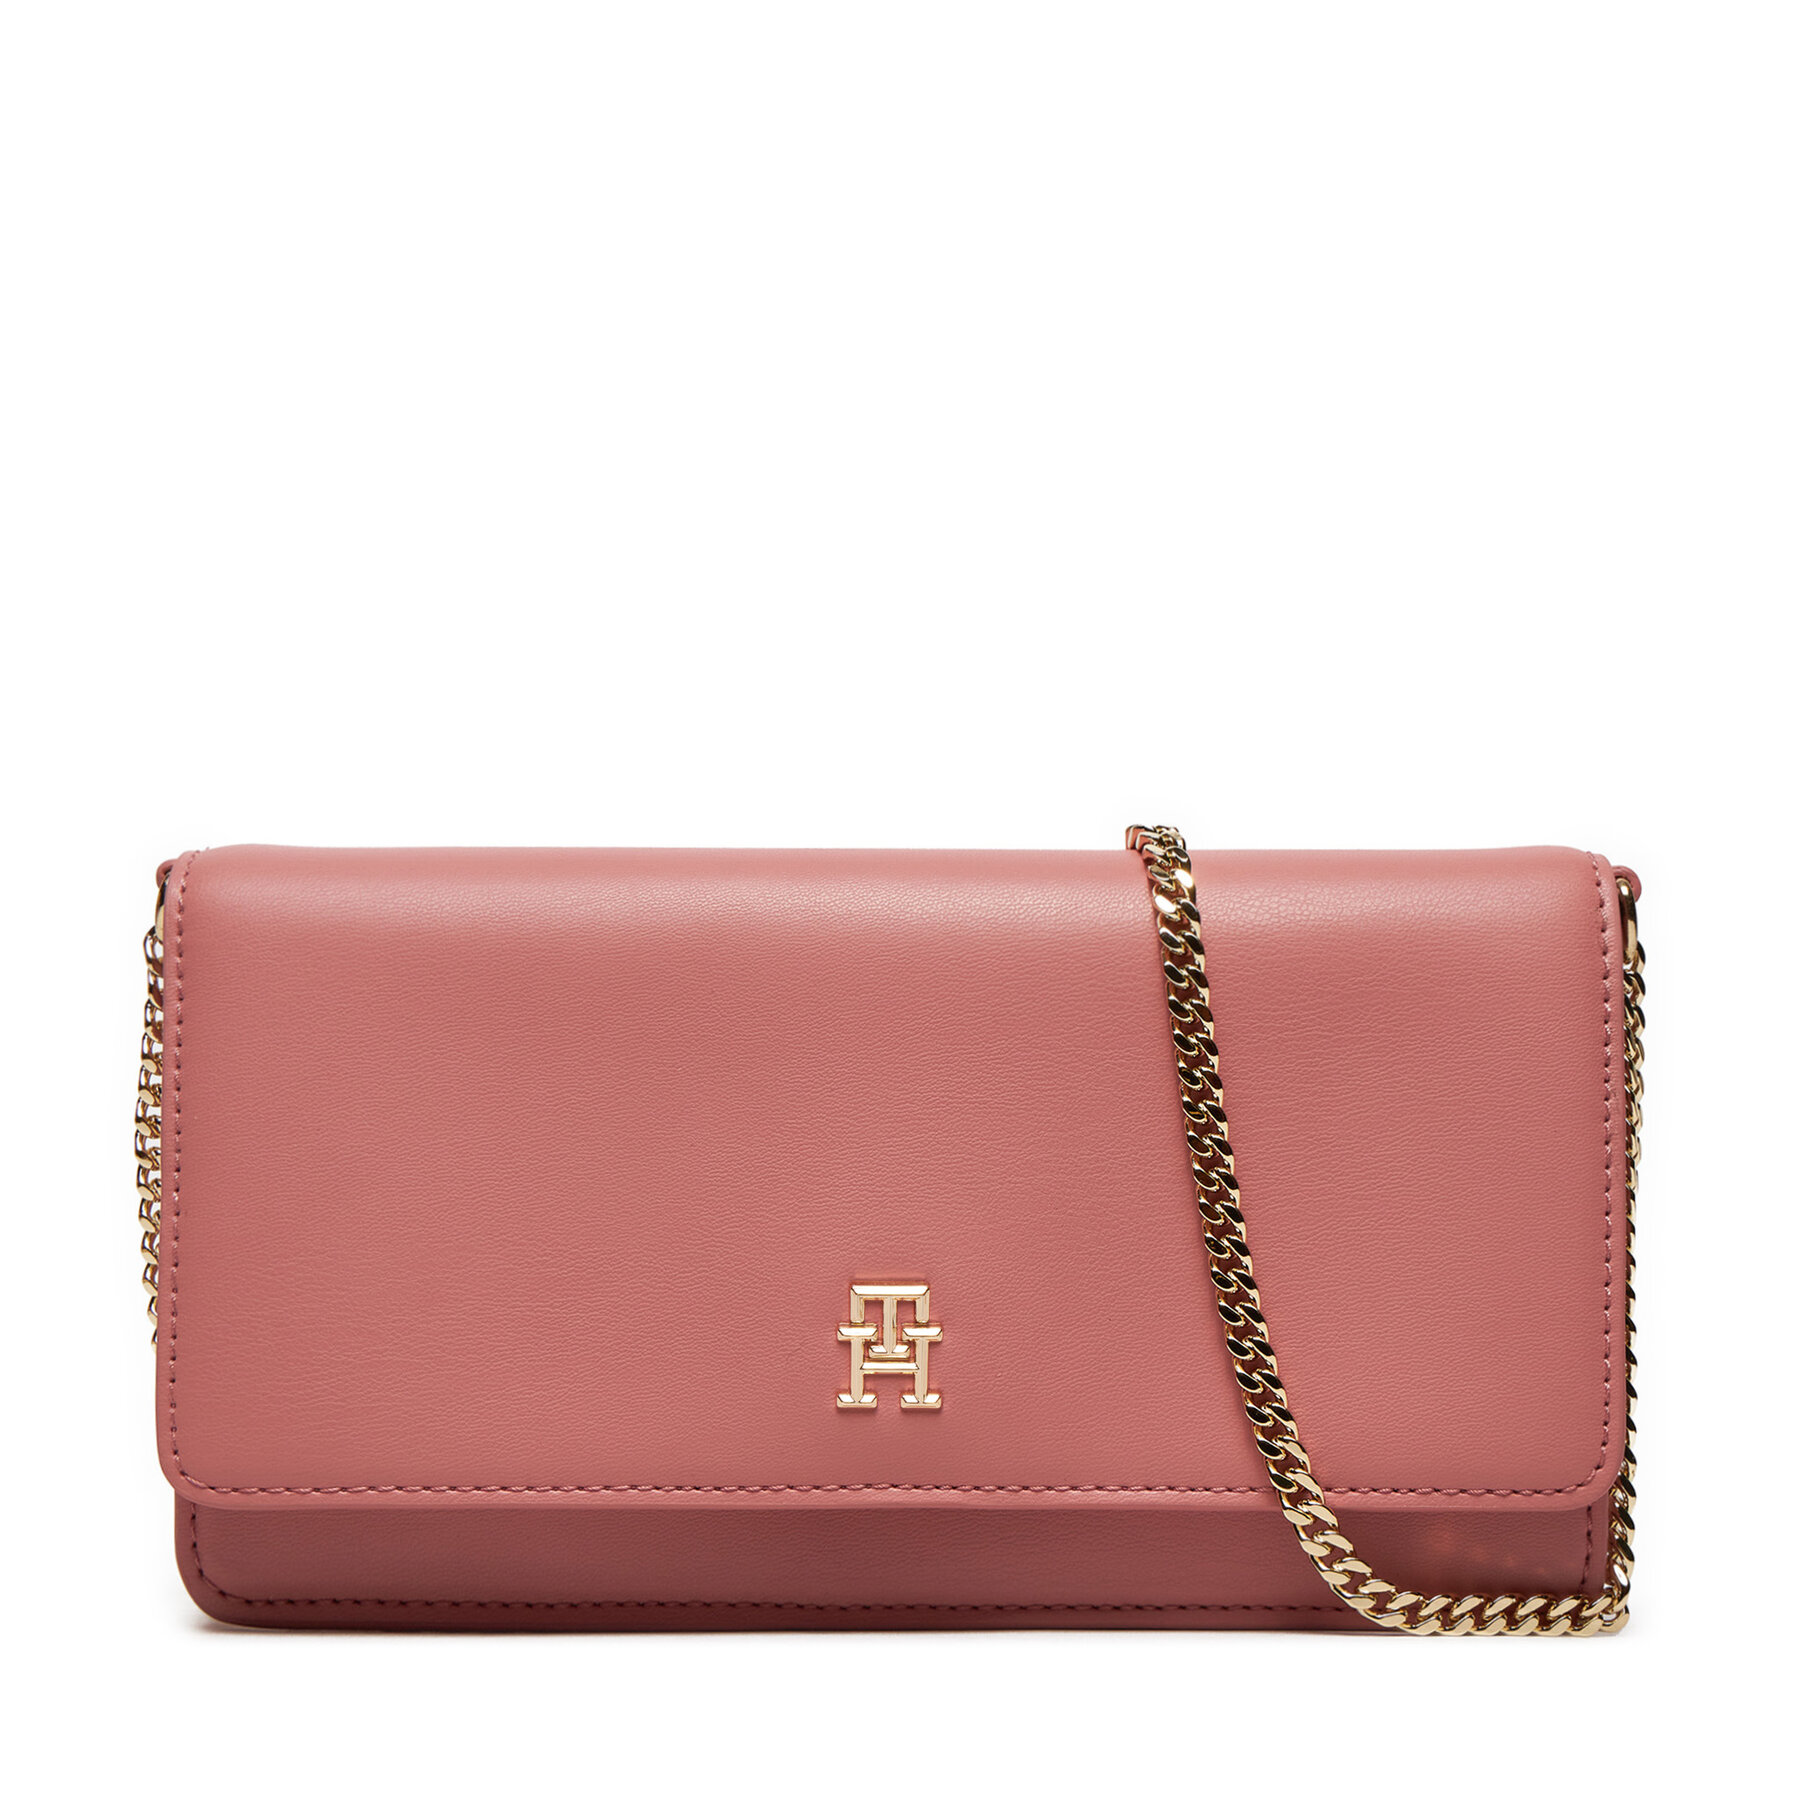 Handtasche Tommy Hilfiger Th Refined Chain Crossover AW0AW16109 Teaberry Blossom TJ5 von Tommy Hilfiger